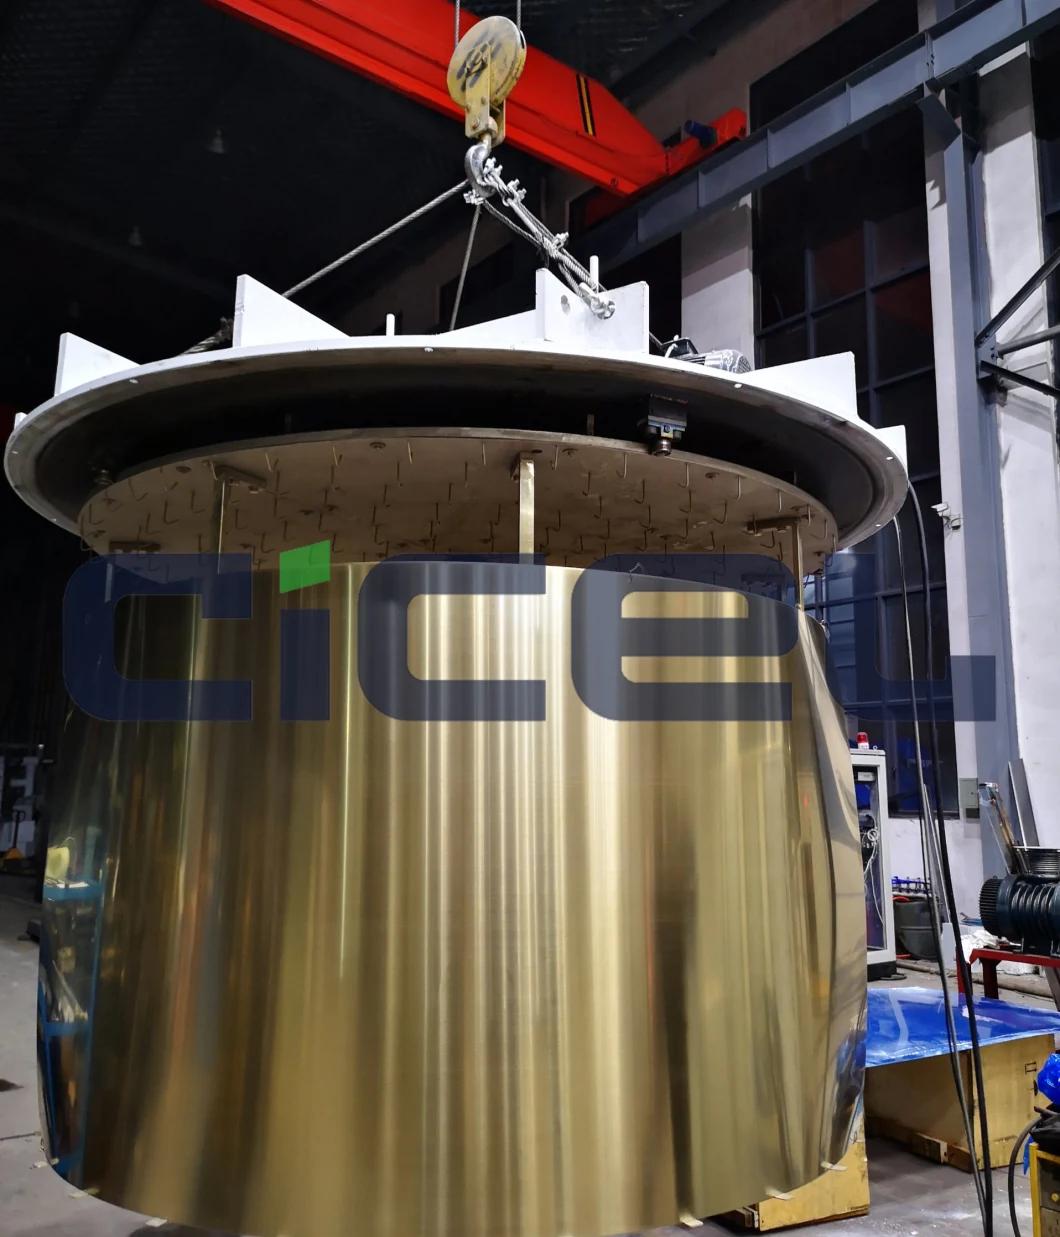 PVD Vacuum Coating Machine for Stainless Steel Sheet/Top Door Design Big Size PVD Coating Machine for Stainless Steel Sheet/Tubes/Pipes/Furniture Parts